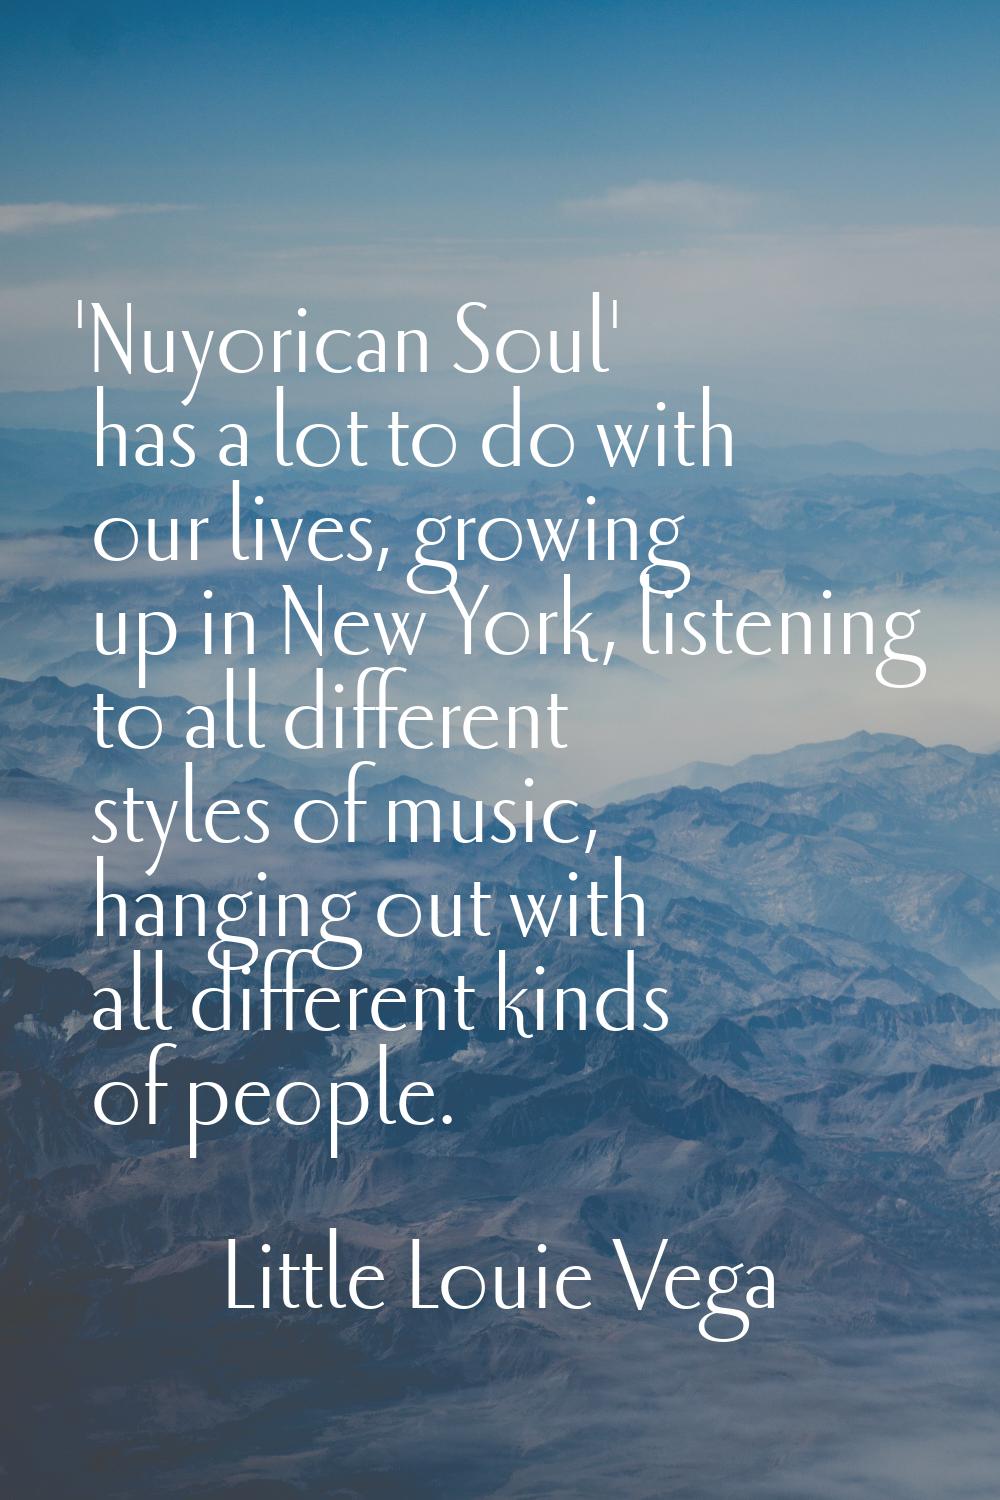 'Nuyorican Soul' has a lot to do with our lives, growing up in New York, listening to all different